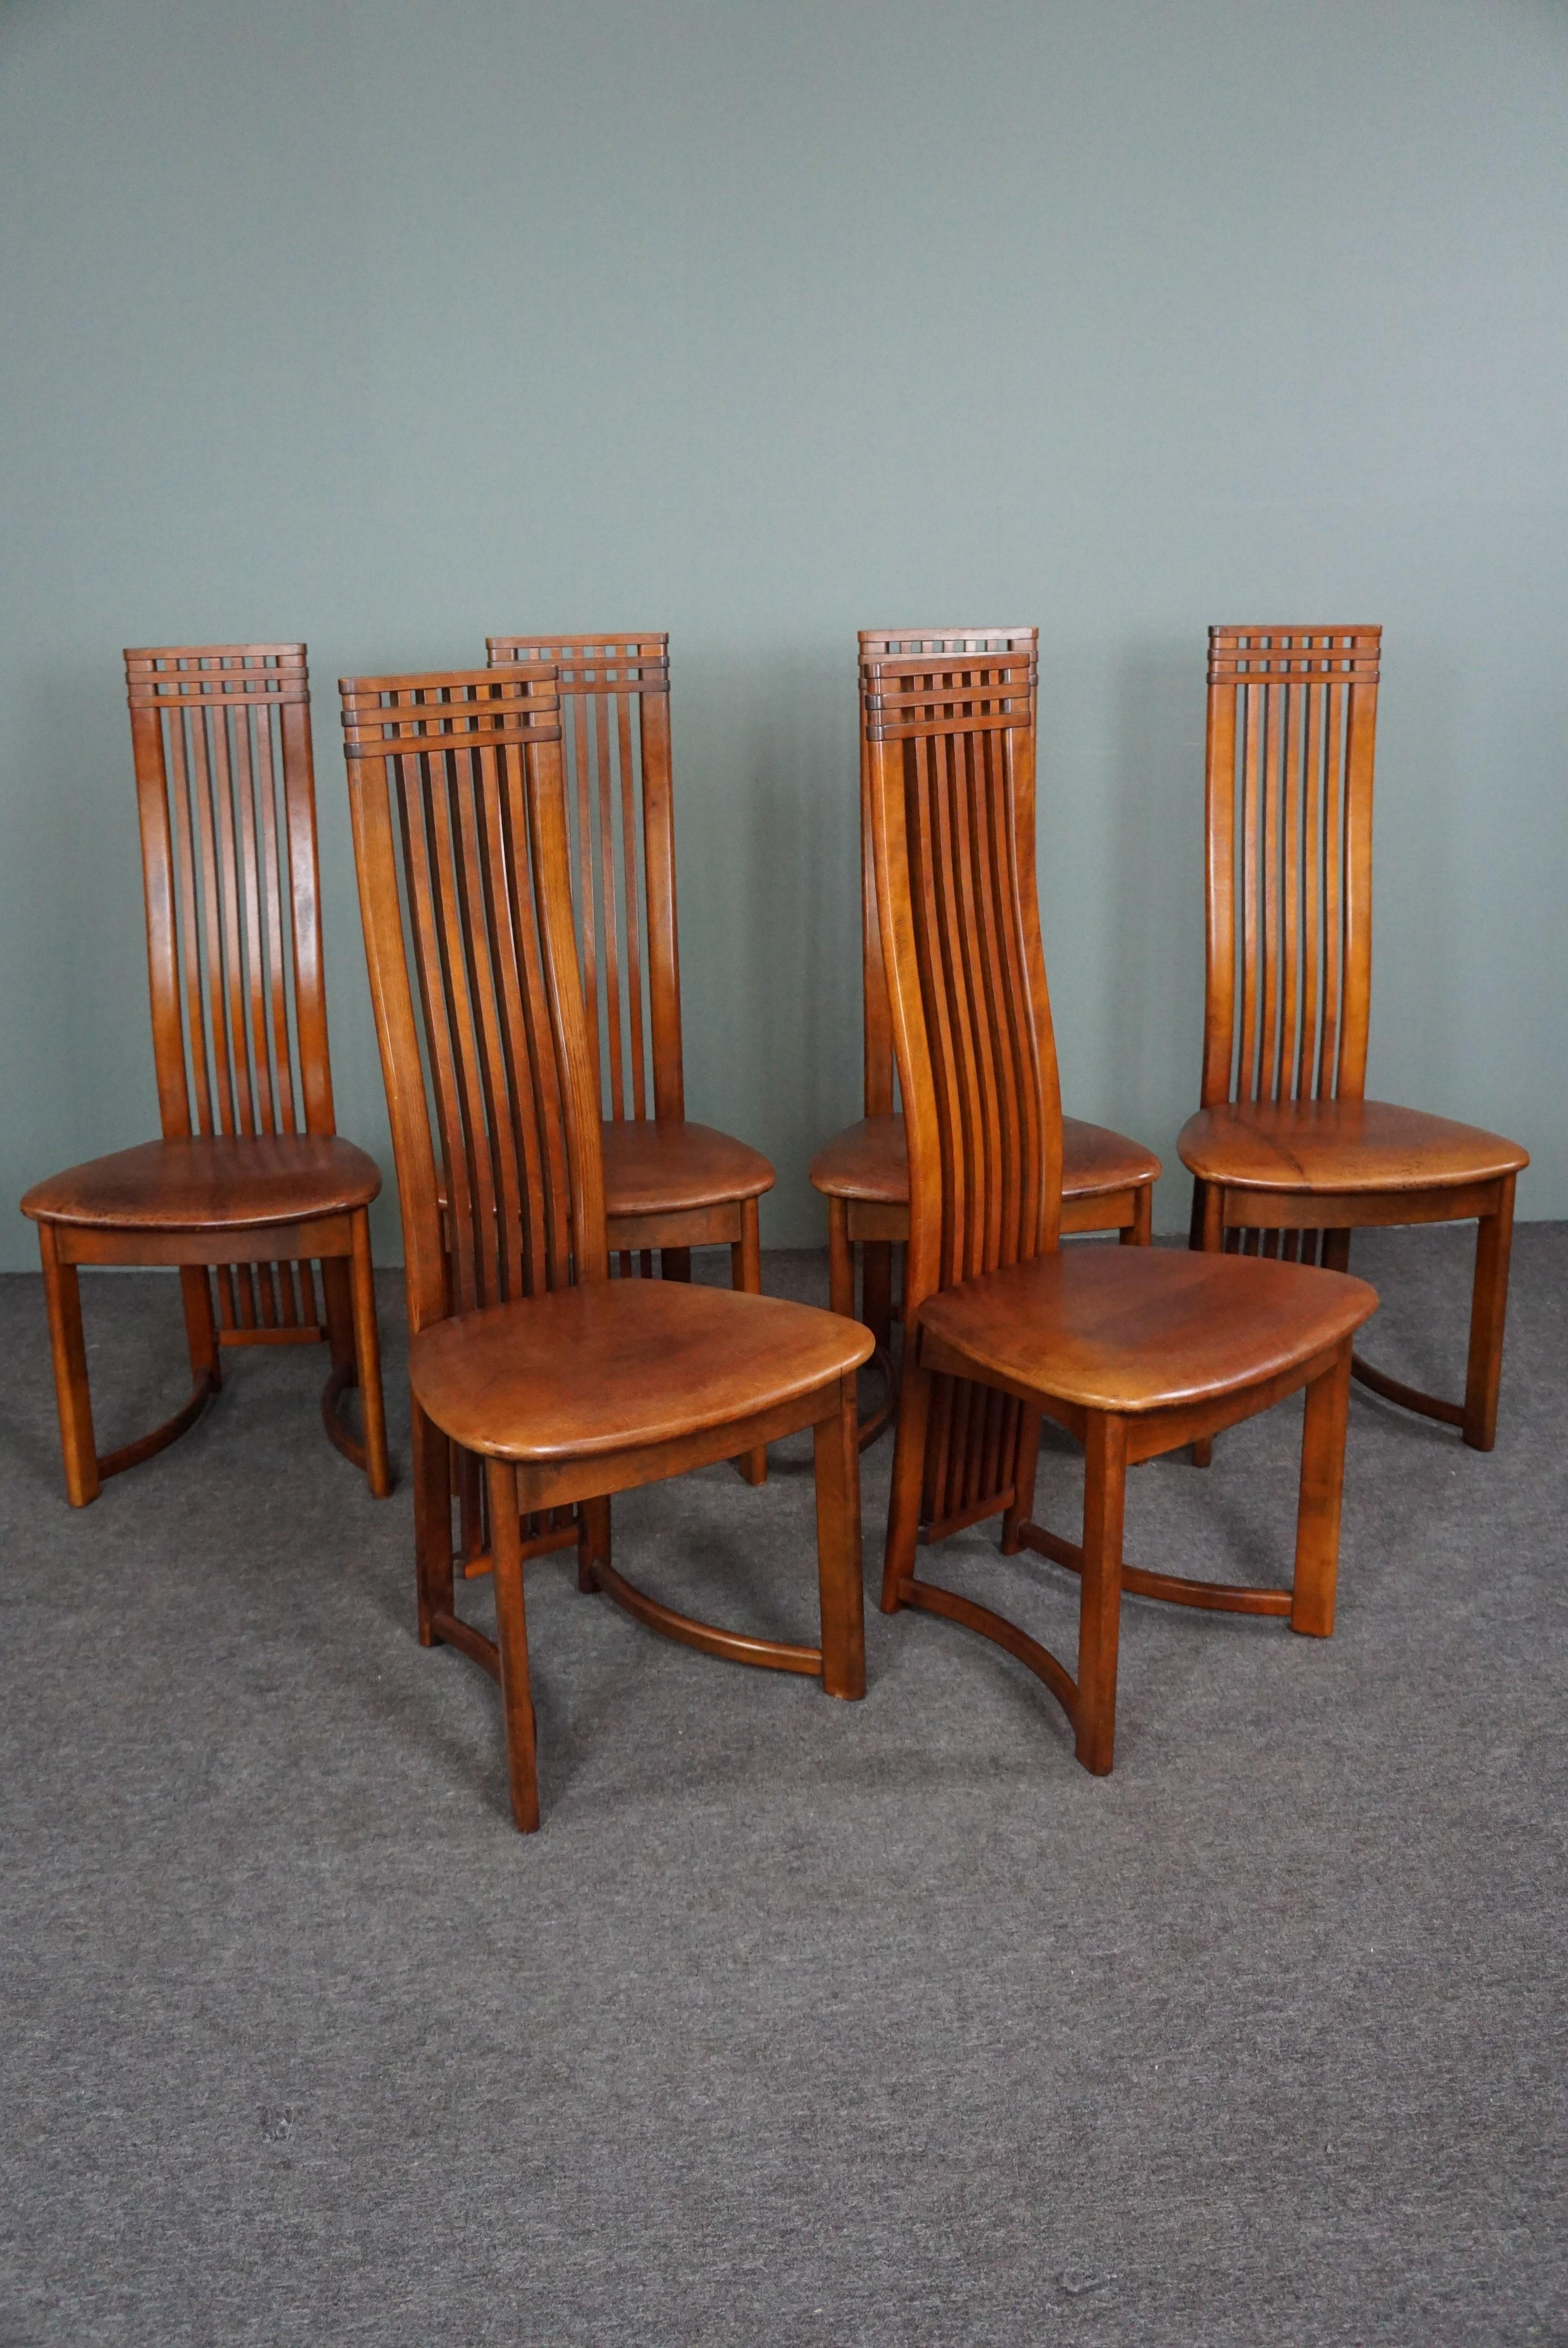 Offered is this set of 6 beautiful dining room chairs with sheep leather seats.
Is it the combination of the sheep leather and the high wooden backrest, or is it the design and appearance that make these chairs so striking? What we do know is that